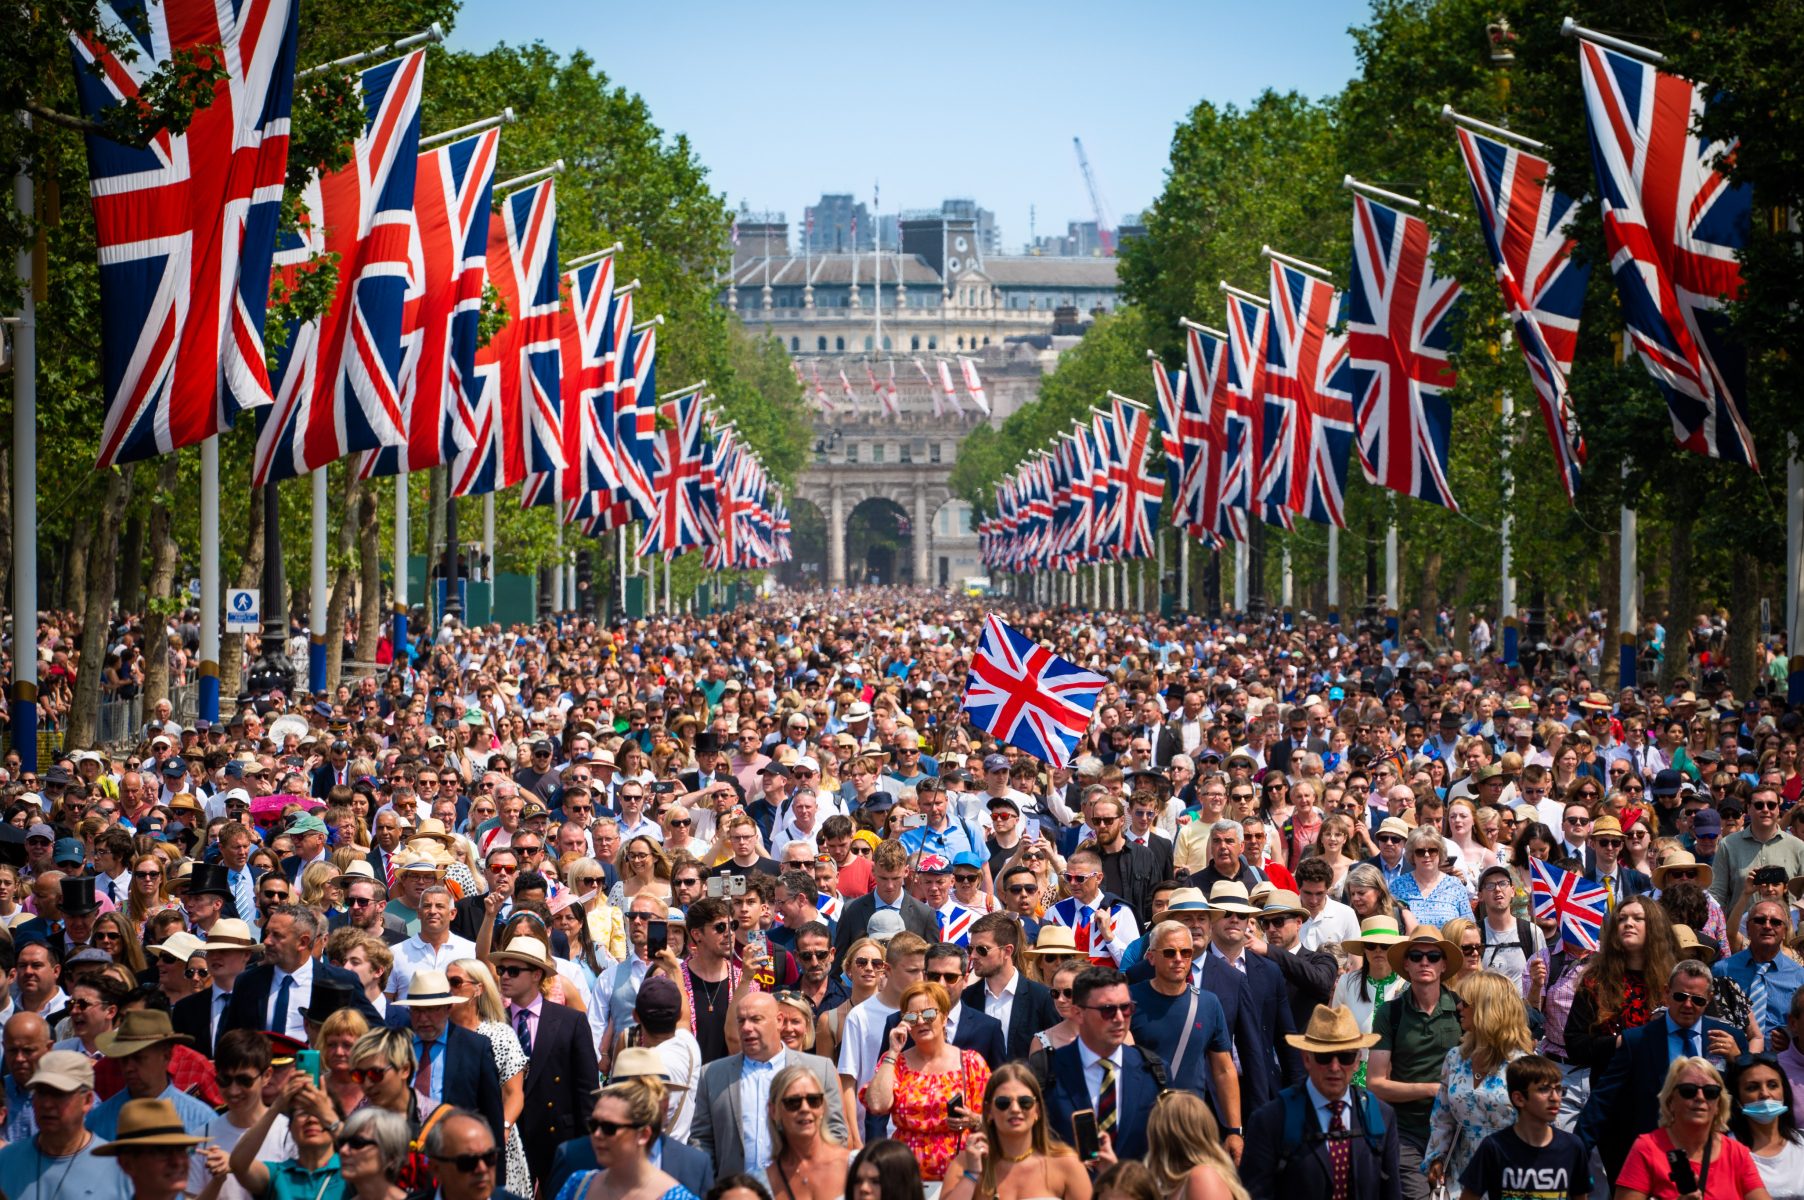 Image of a large crowd in summer flanked by UK flags